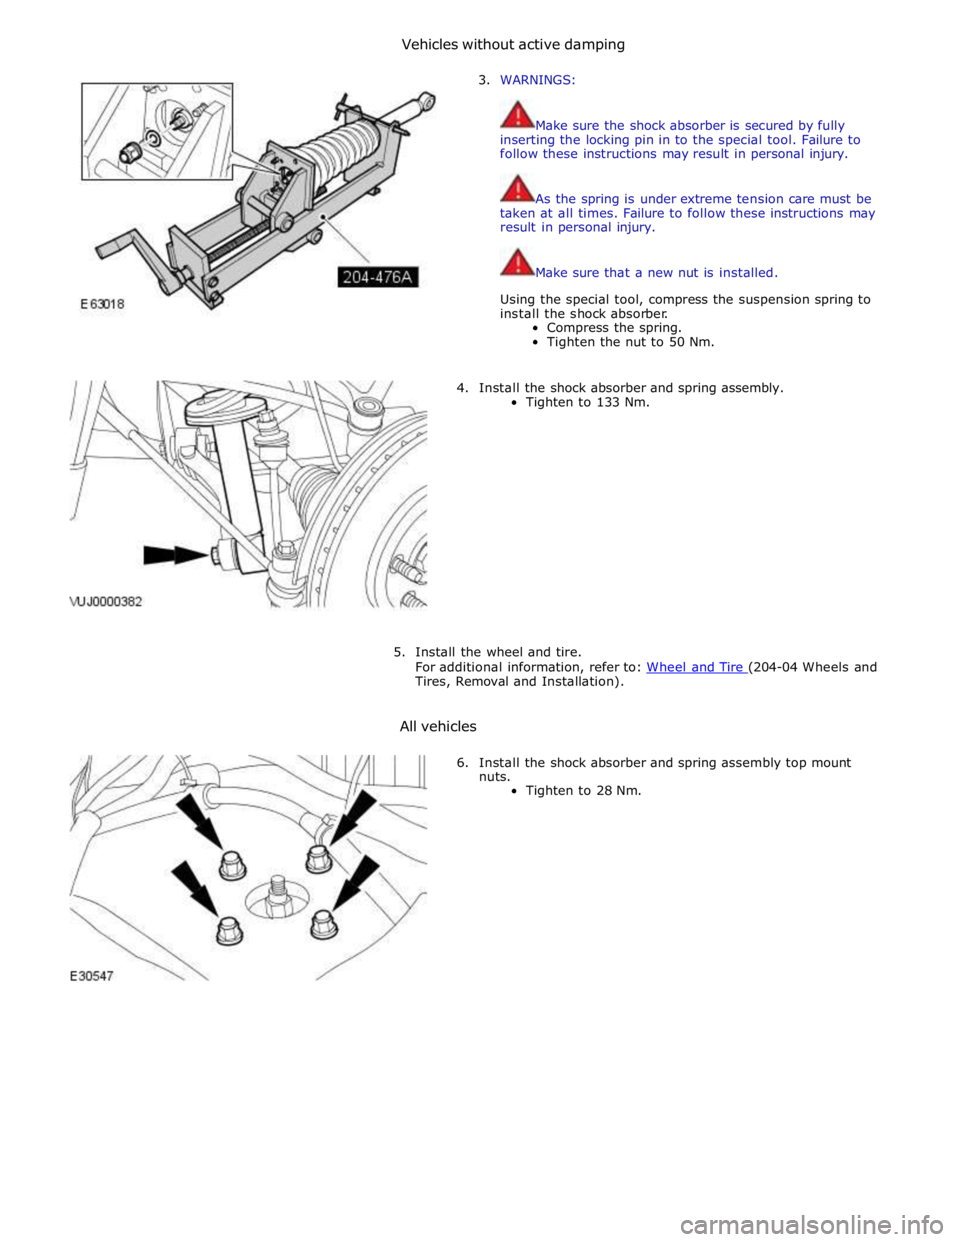 JAGUAR XFR 2010 1.G Service Manual 3. WARNINGS: 
 
 
Make sure the shock absorber is secured by fully 
inserting the locking pin in to the special tool. Failure to 
follow these instructions may result in personal injury. 
 
 
As the s